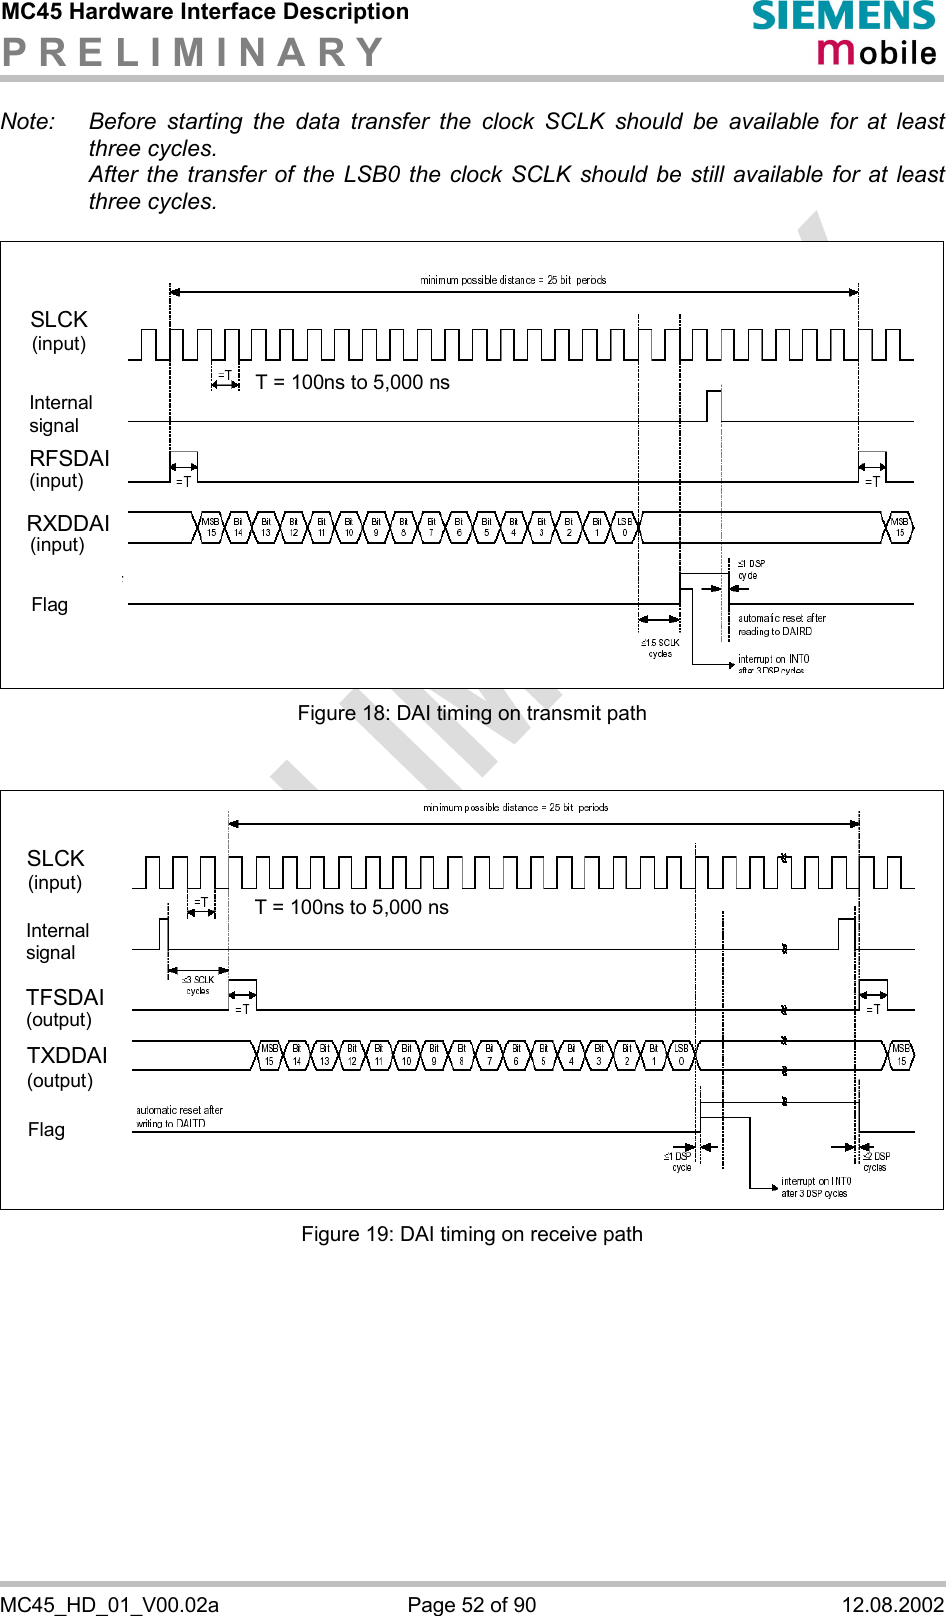 MC45 Hardware Interface Description P R E L I M I N A R Y      MC45_HD_01_V00.02a  Page 52 of 90  12.08.2002 Note:  Before starting the data transfer the clock SCLK should be available for at least three cycles.   After the transfer of the LSB0 the clock SCLK should be still available for at least three cycles.  SLCKRFSDAIRXDDAI(input)Internalsignal(input)(input)FlagT = 100ns to 5,000 ns Figure 18: DAI timing on transmit path   SLCKTFSDAITXDDAI(input)Internalsignal(output)(output)FlagT = 100ns to 5,000 ns Figure 19: DAI timing on receive path   